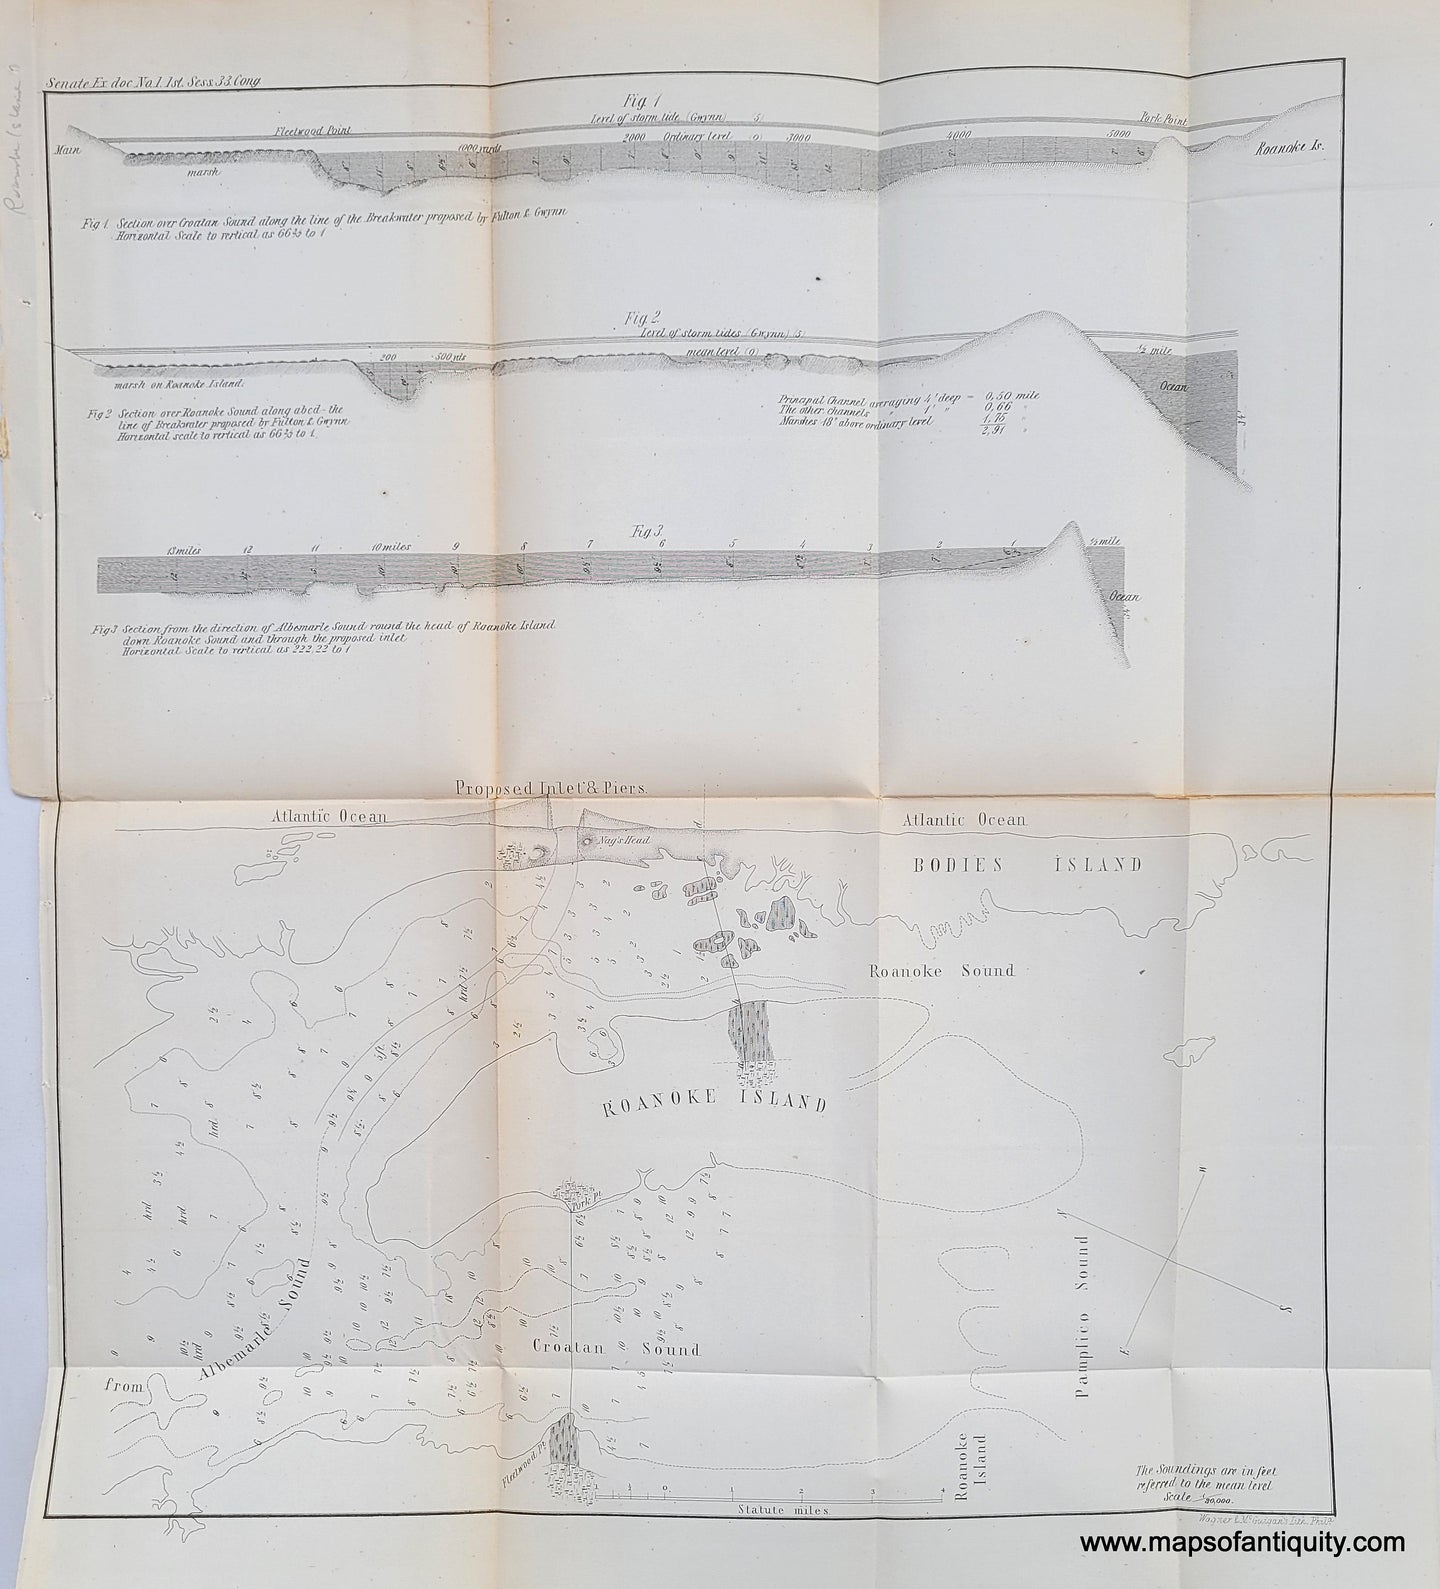 Antique-Map-Roanoke-Island-North-Carolina-Chart-Nautical-Harbor-Sound-Charts-Congressional-Record-33-1853-1850s-1800s-Mid-19th-Century-Maps-of-Antiquity